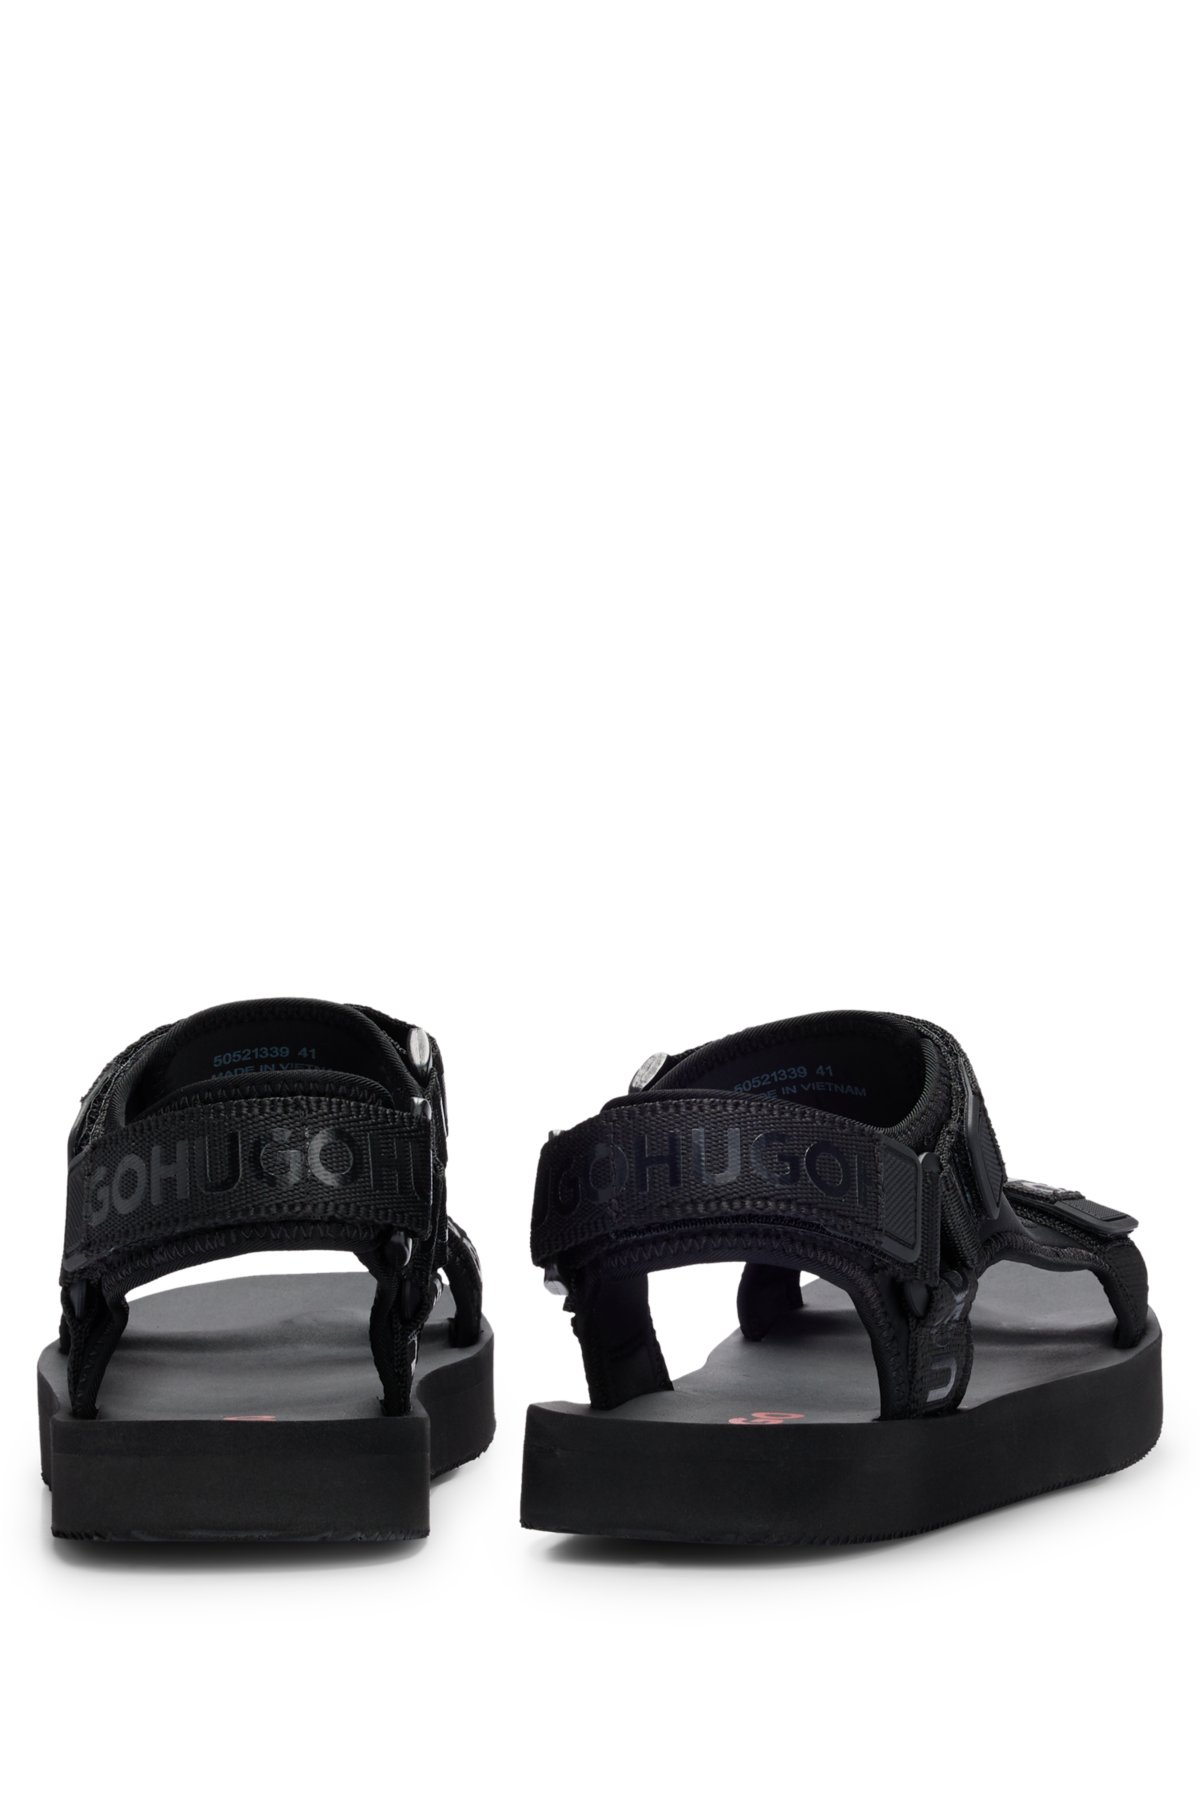 Branded sandals with riptape straps and EVA outsole, Black